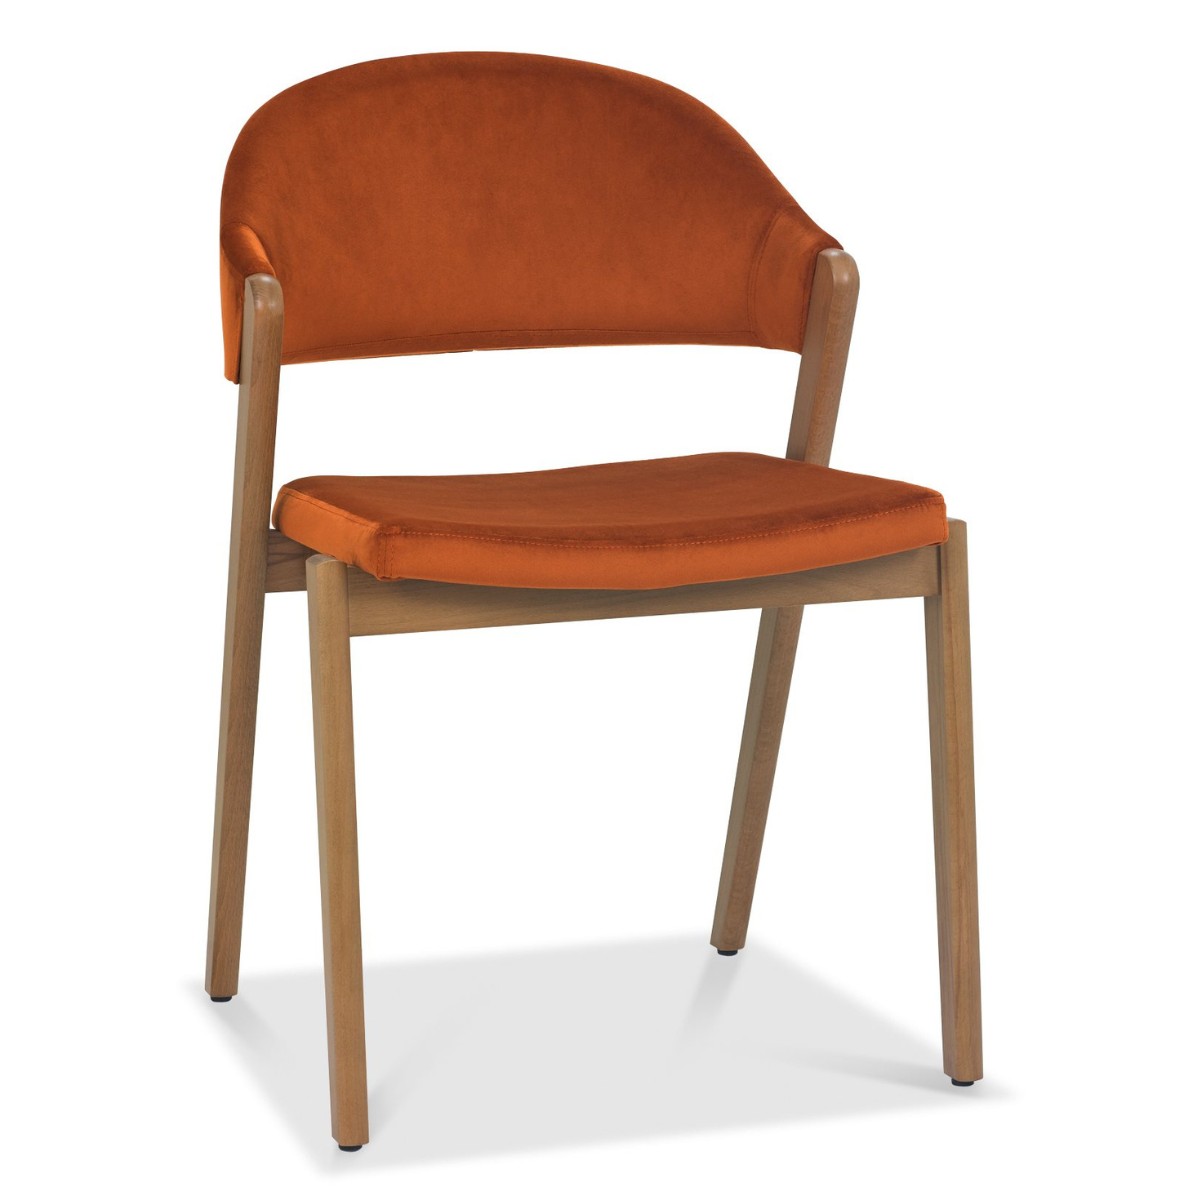 Chambery Rustic Oak carver Dining Chair Orange - 1